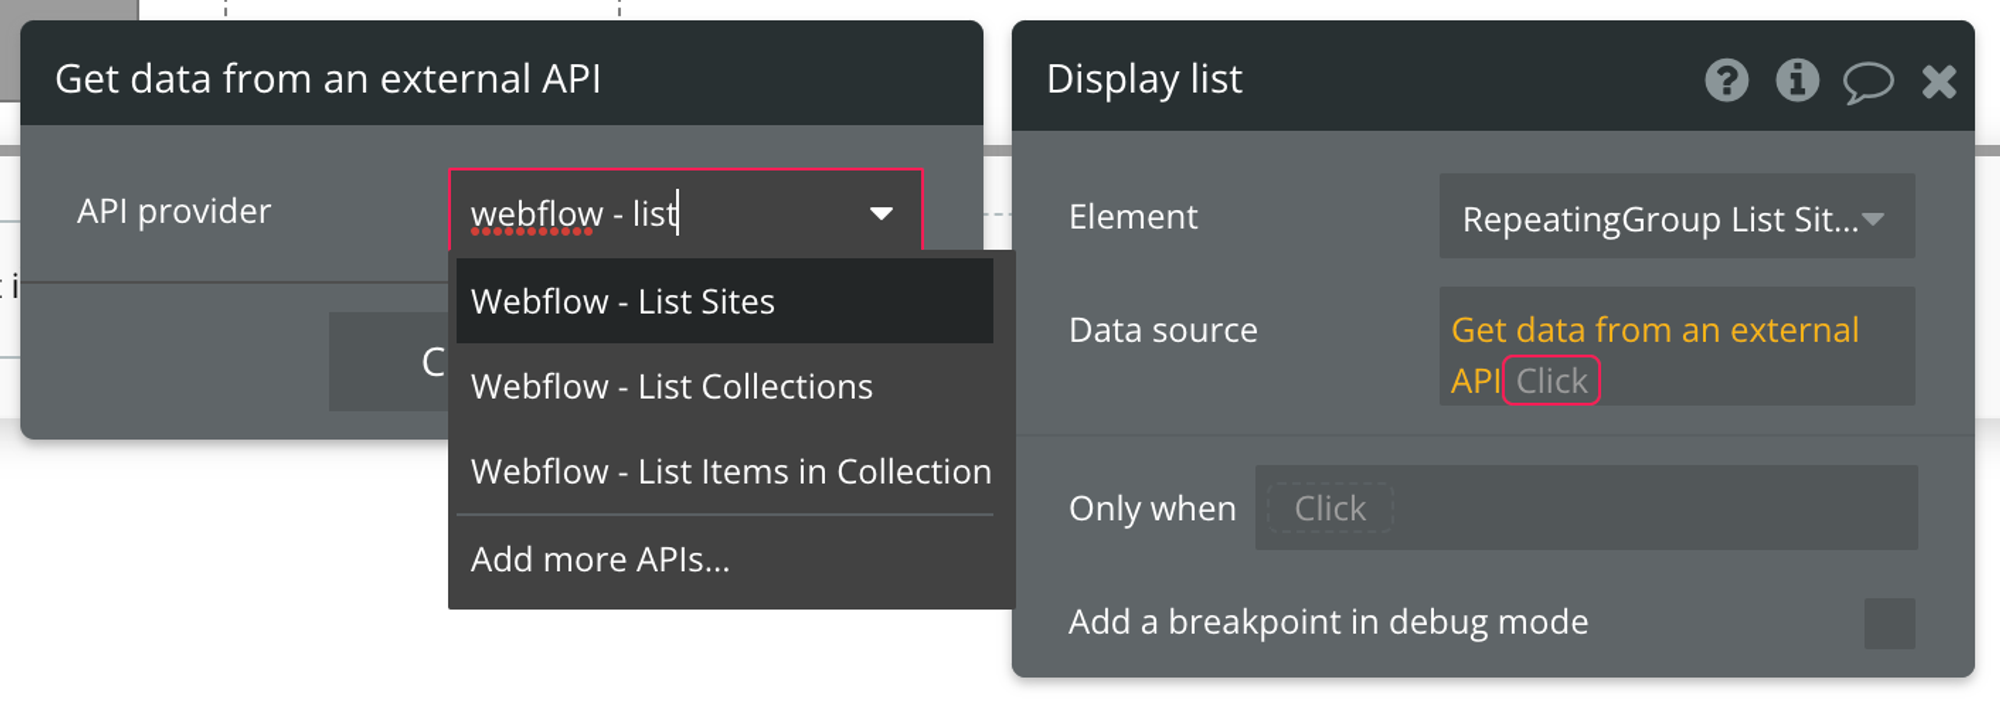 Select "Get data from external API" from the list of data sources, then find Webflow - List Sites from the list of API providers